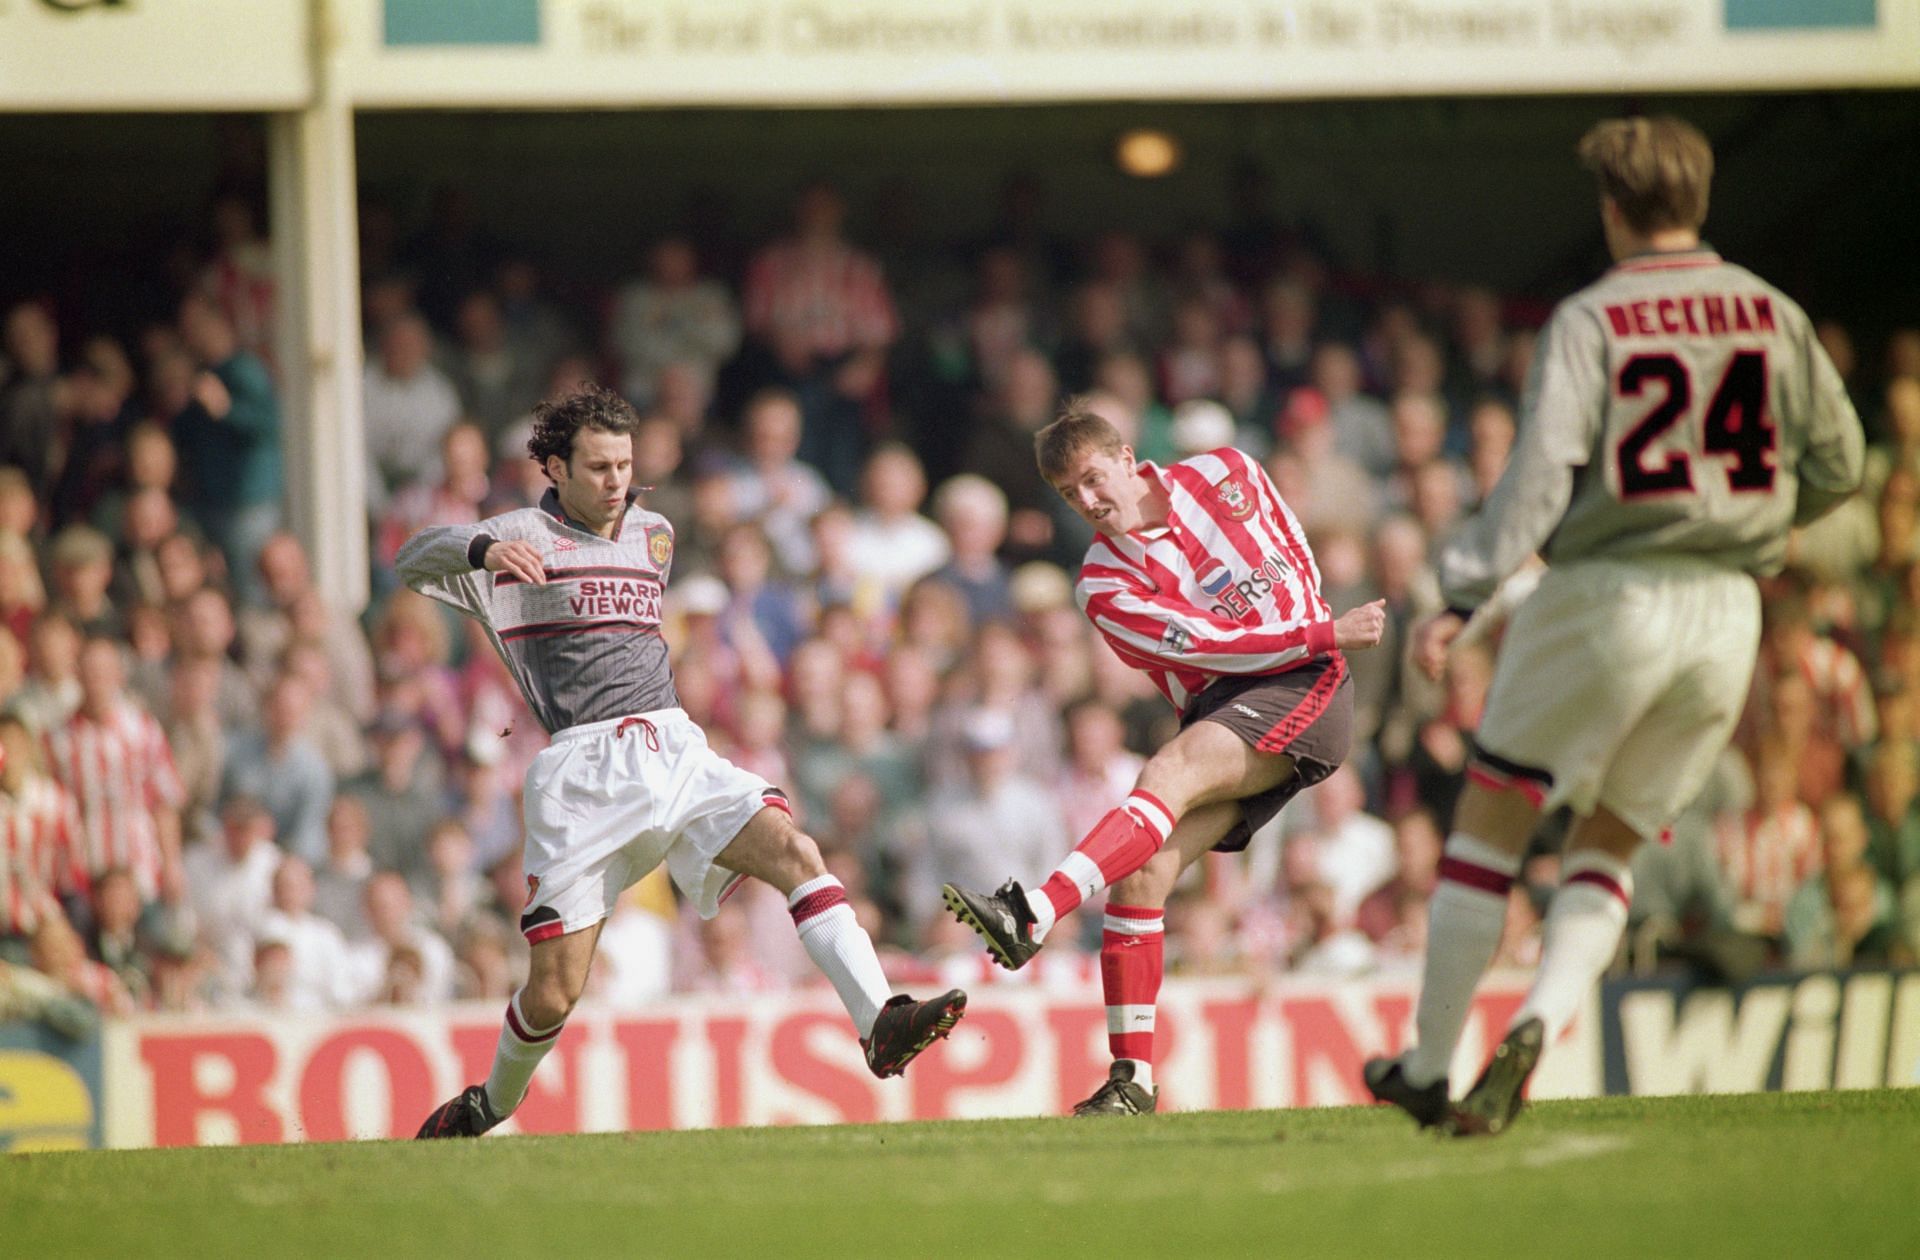 Southampton&#039;s Matt Le Tissier (centre) shoots past Ryan Giggs (left) and David Beckham (right )of Manchester United.